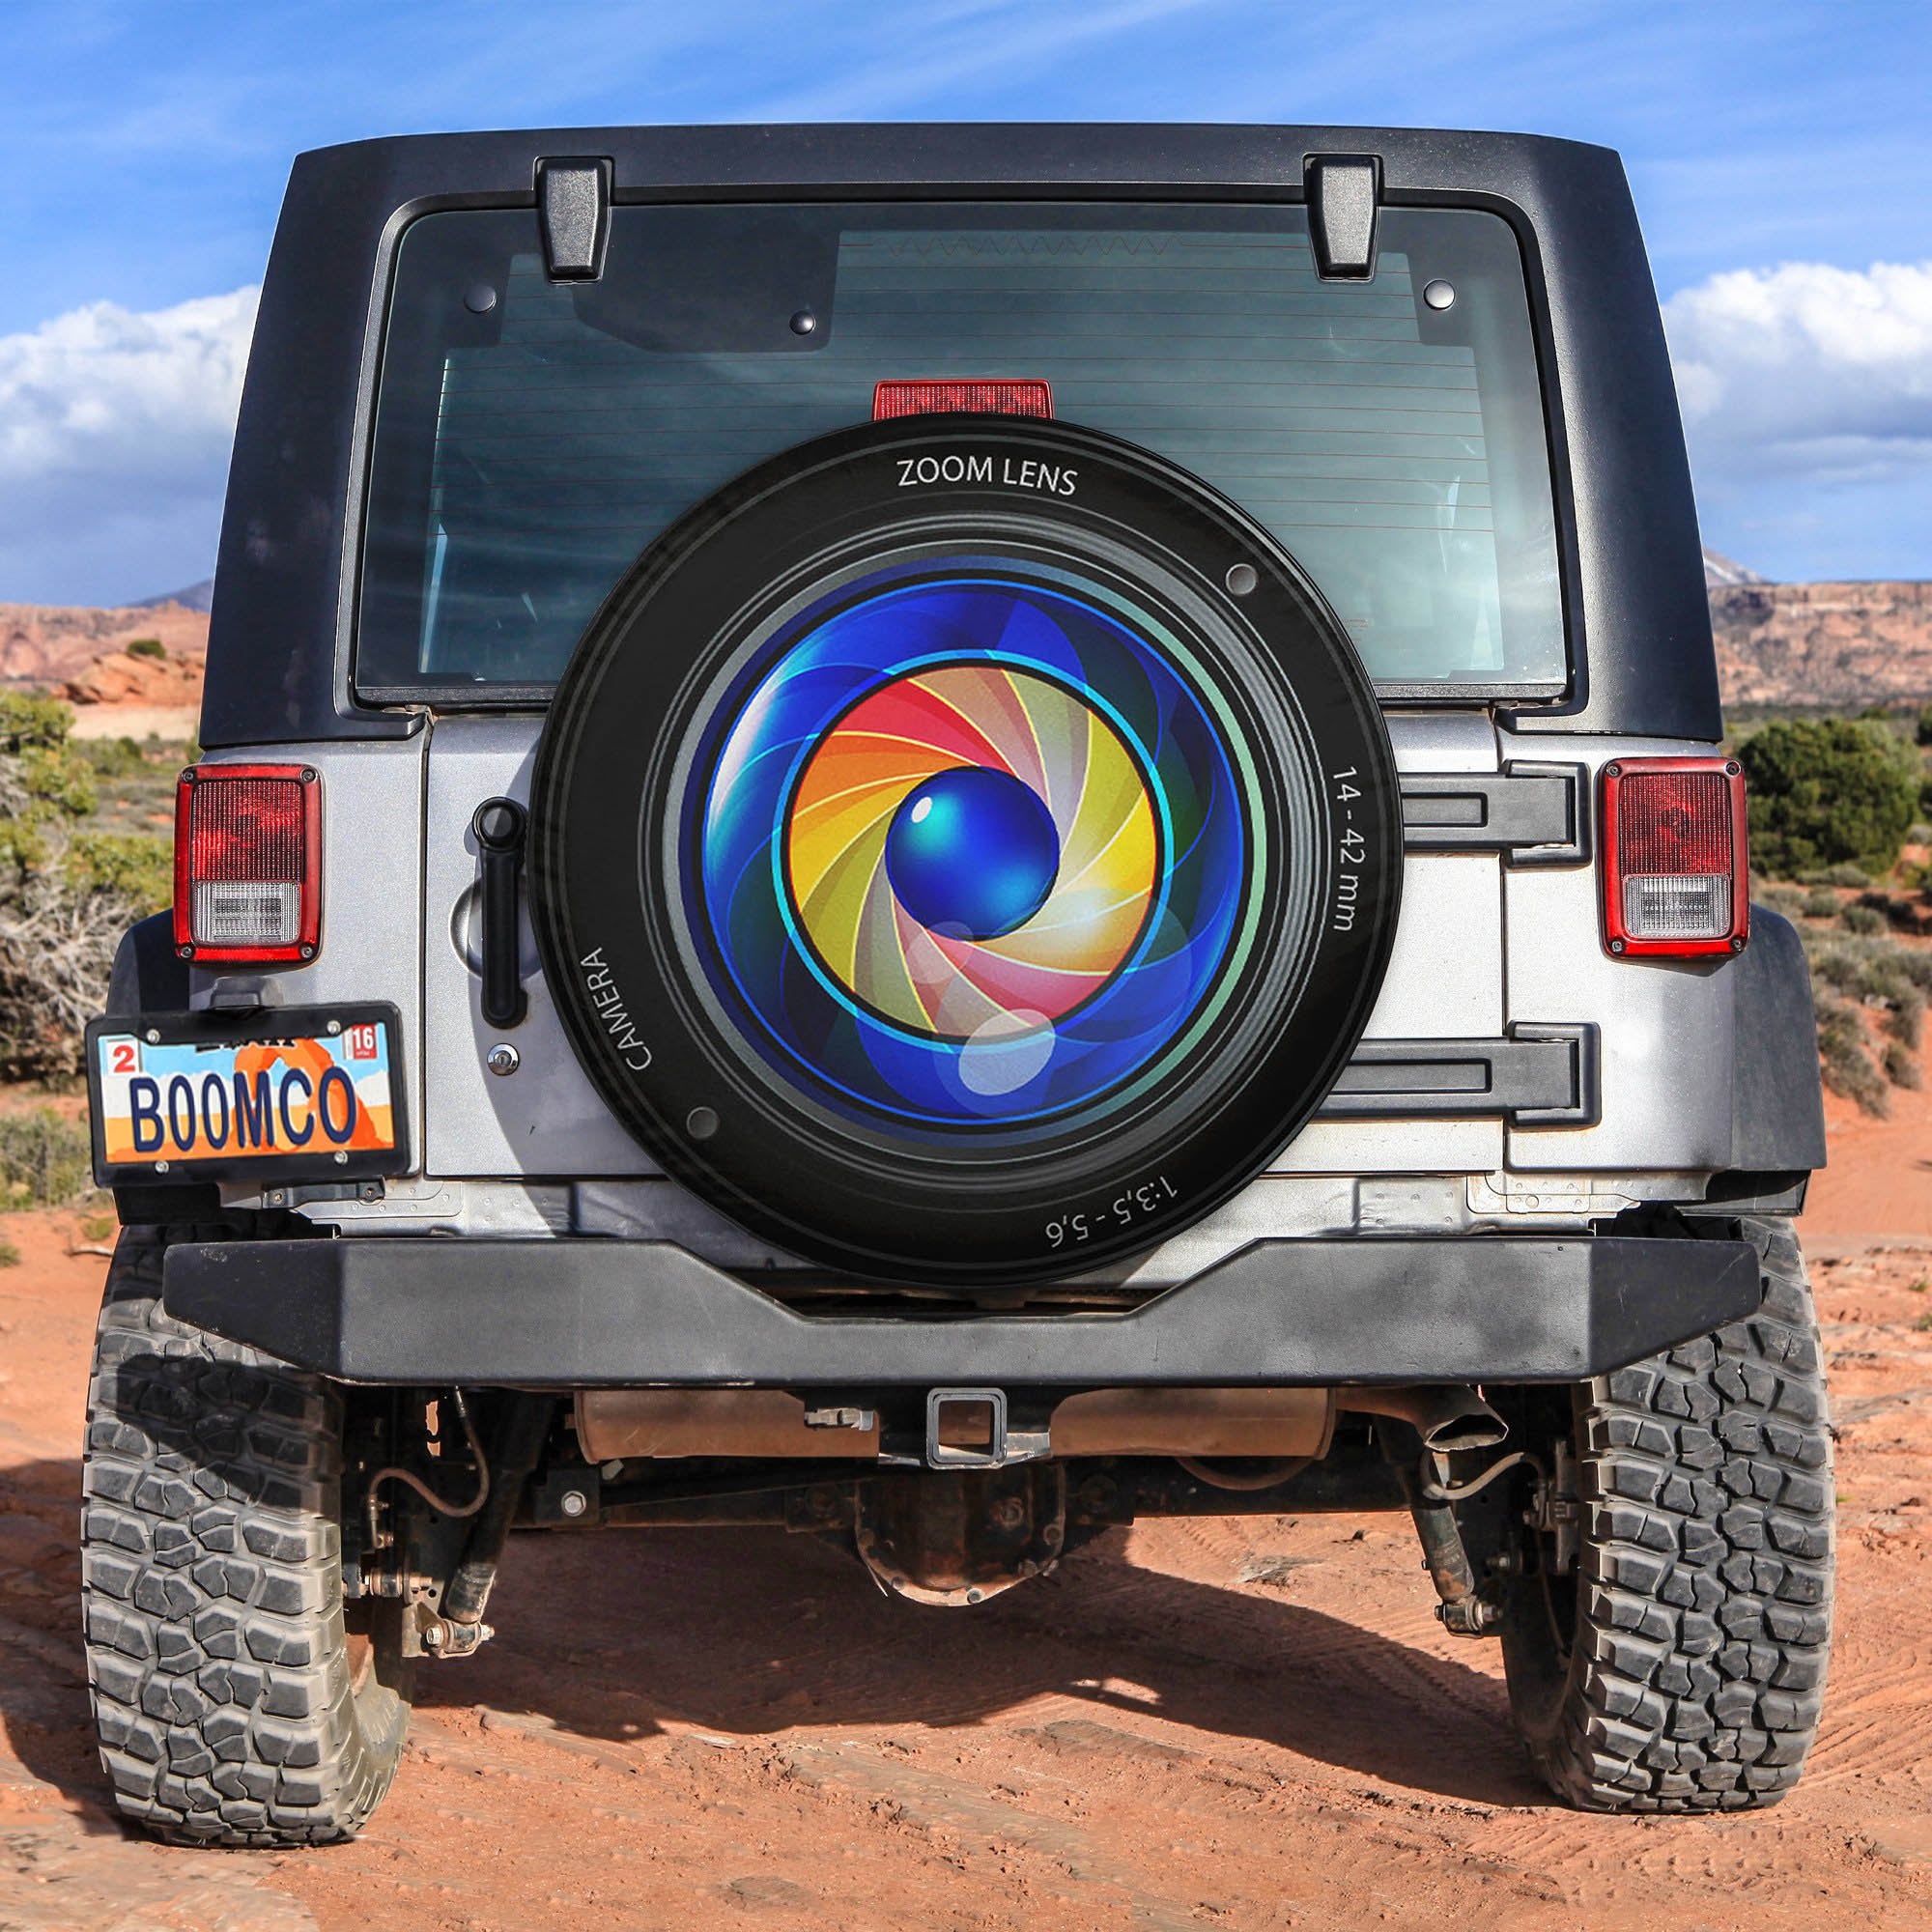 Camera Zoom Len Spare Tire Covers Gift For Campers